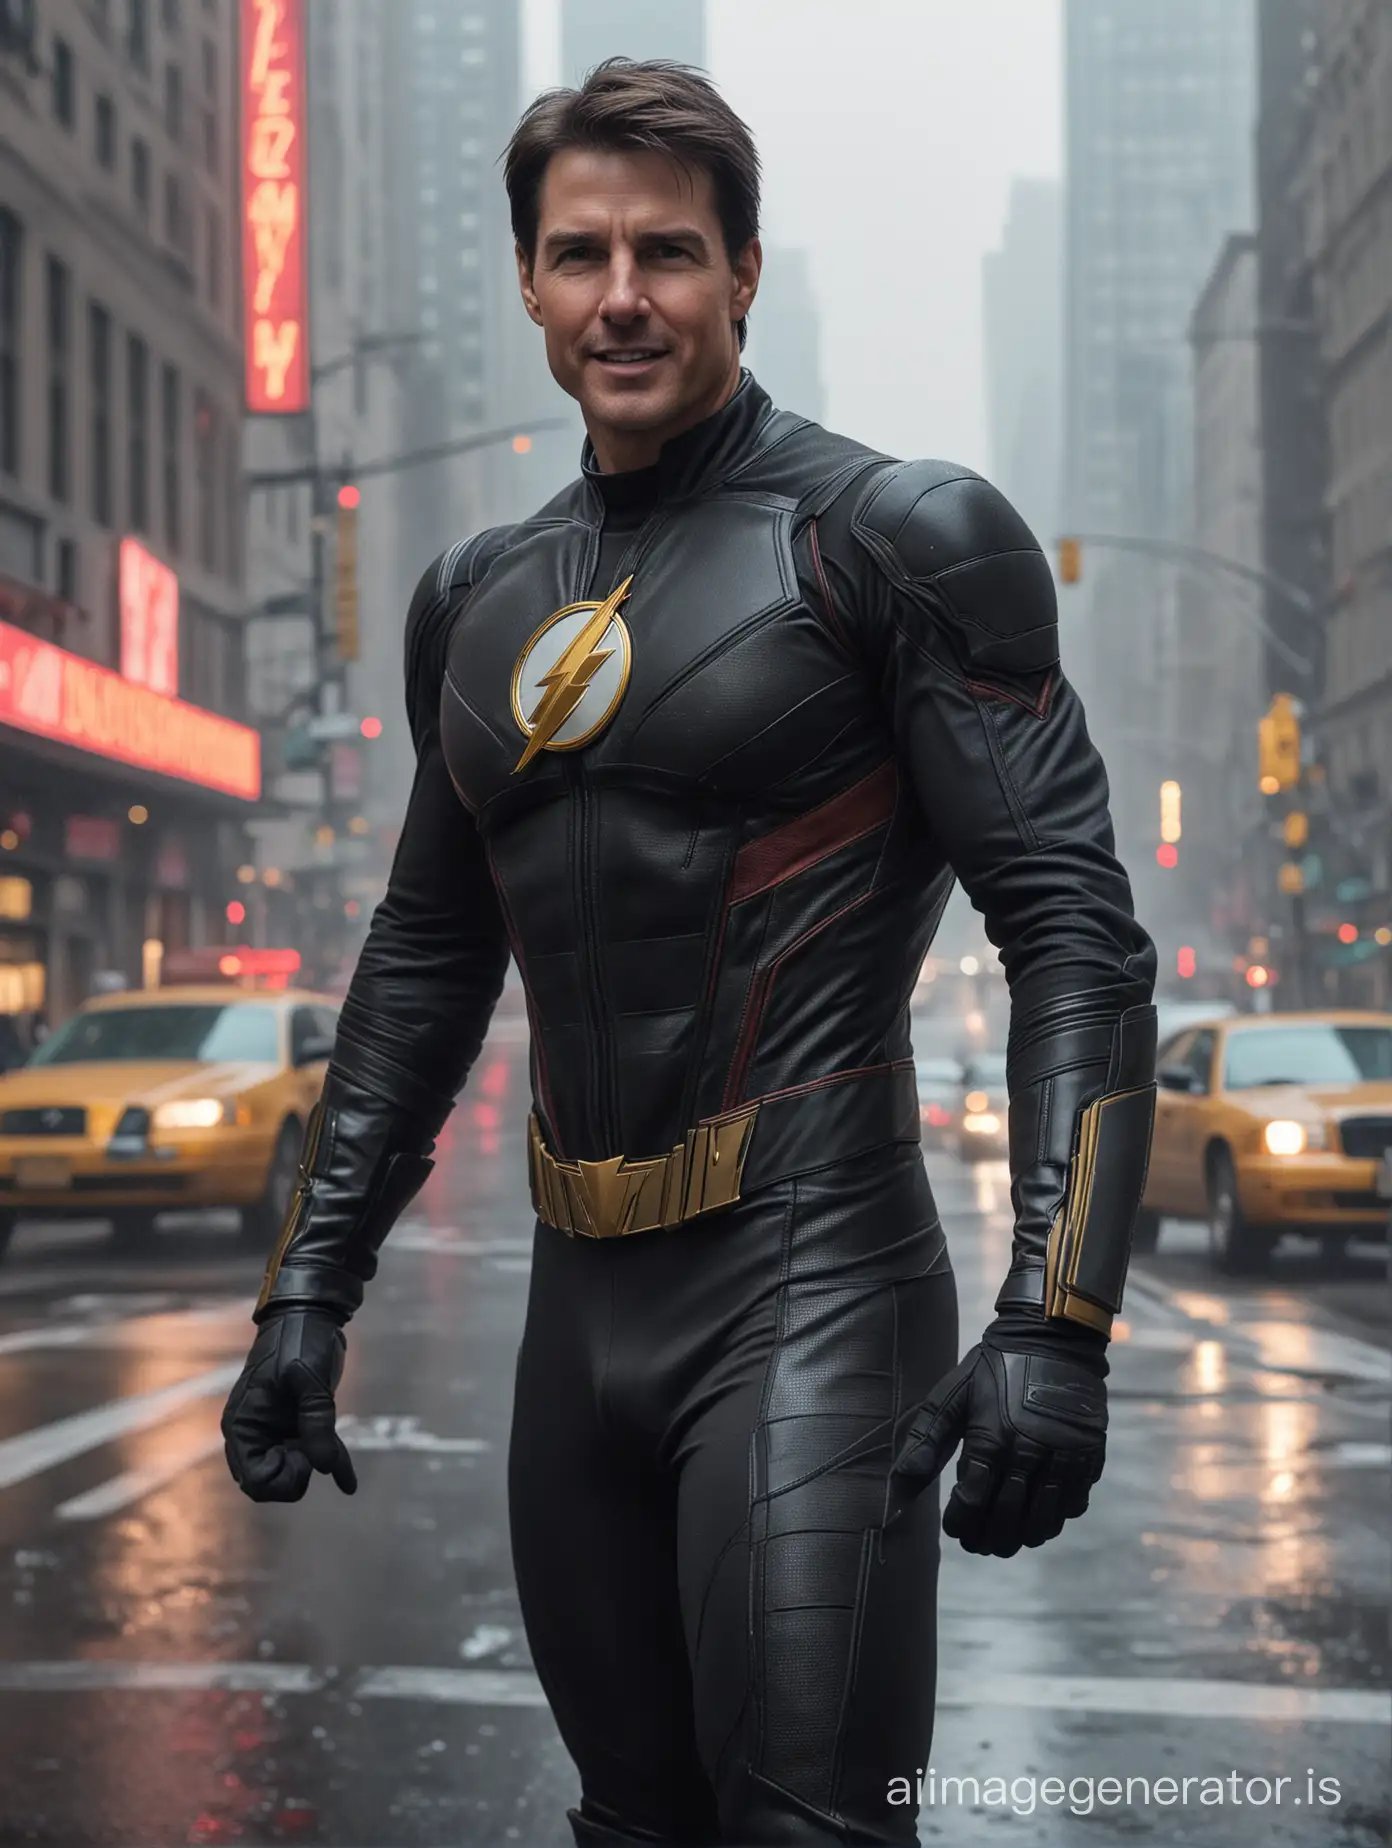 Tom Cruise in original Flash suit, smile in camera face,No Mask, semi full body, 8k photography, high resolution, in foggy new York street as background